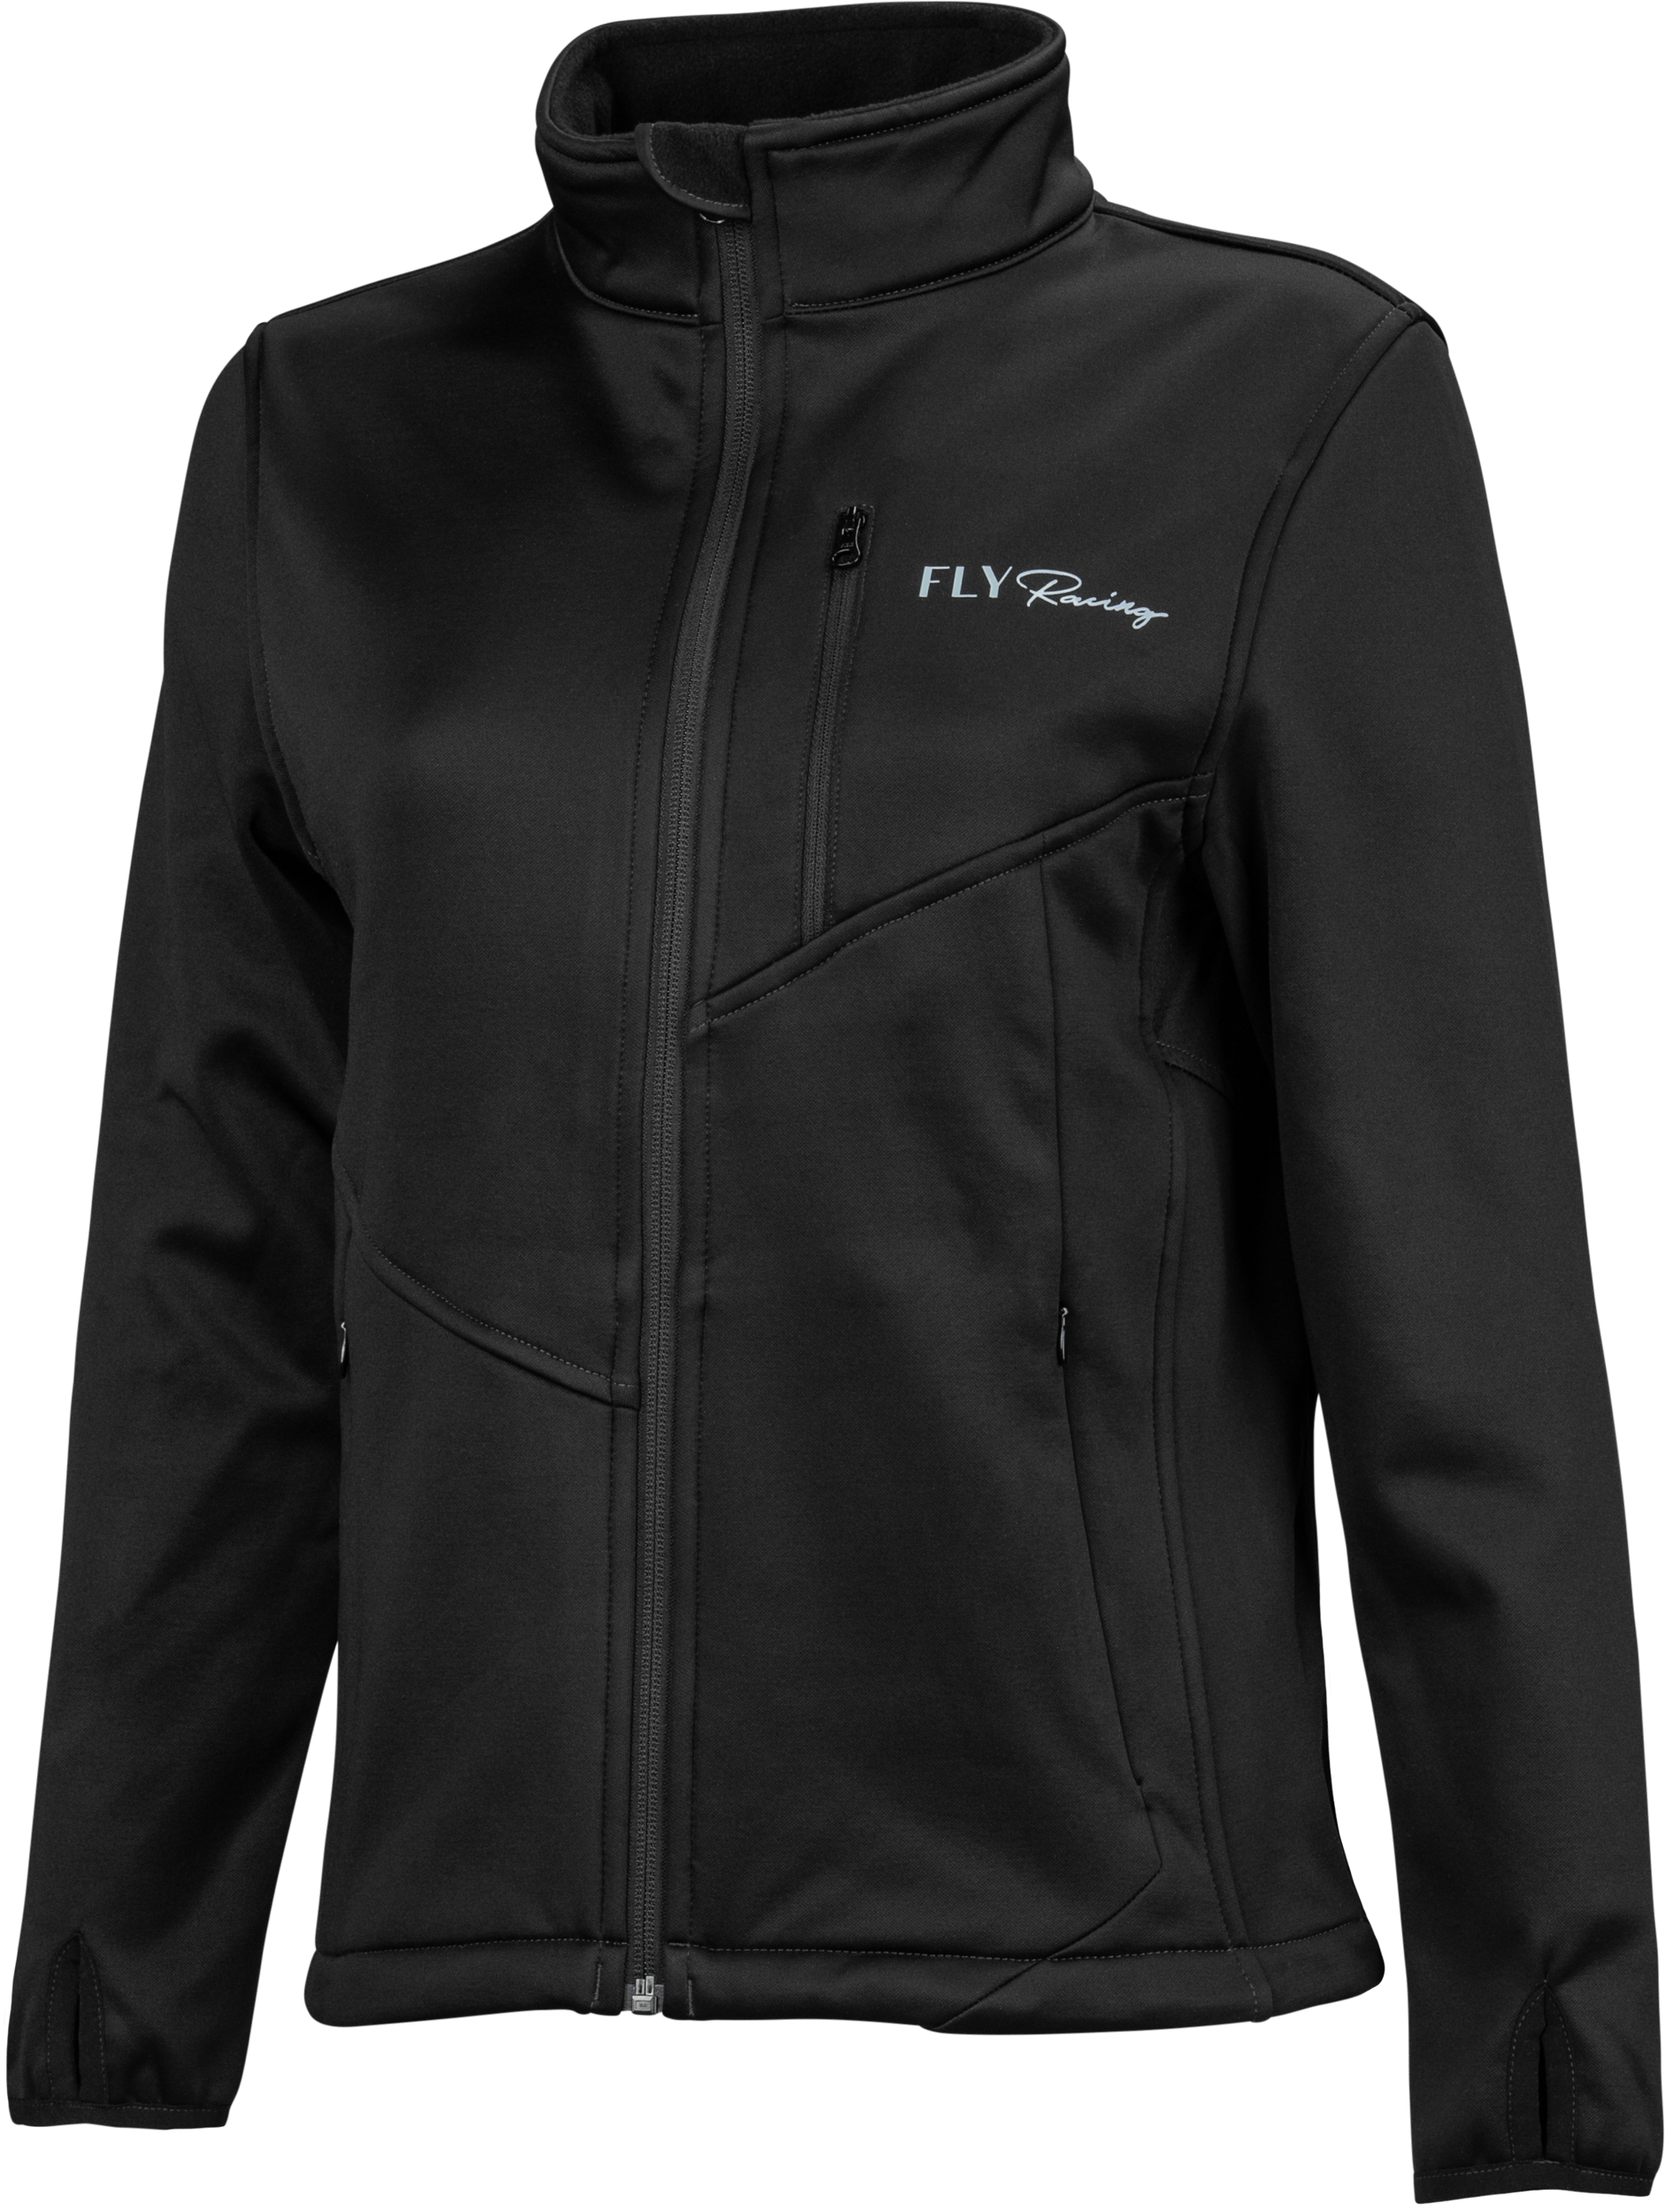 Western Powersports Jacket Black / 2X Women's Mid Layer Jacket By Fly Racing 354-63402X